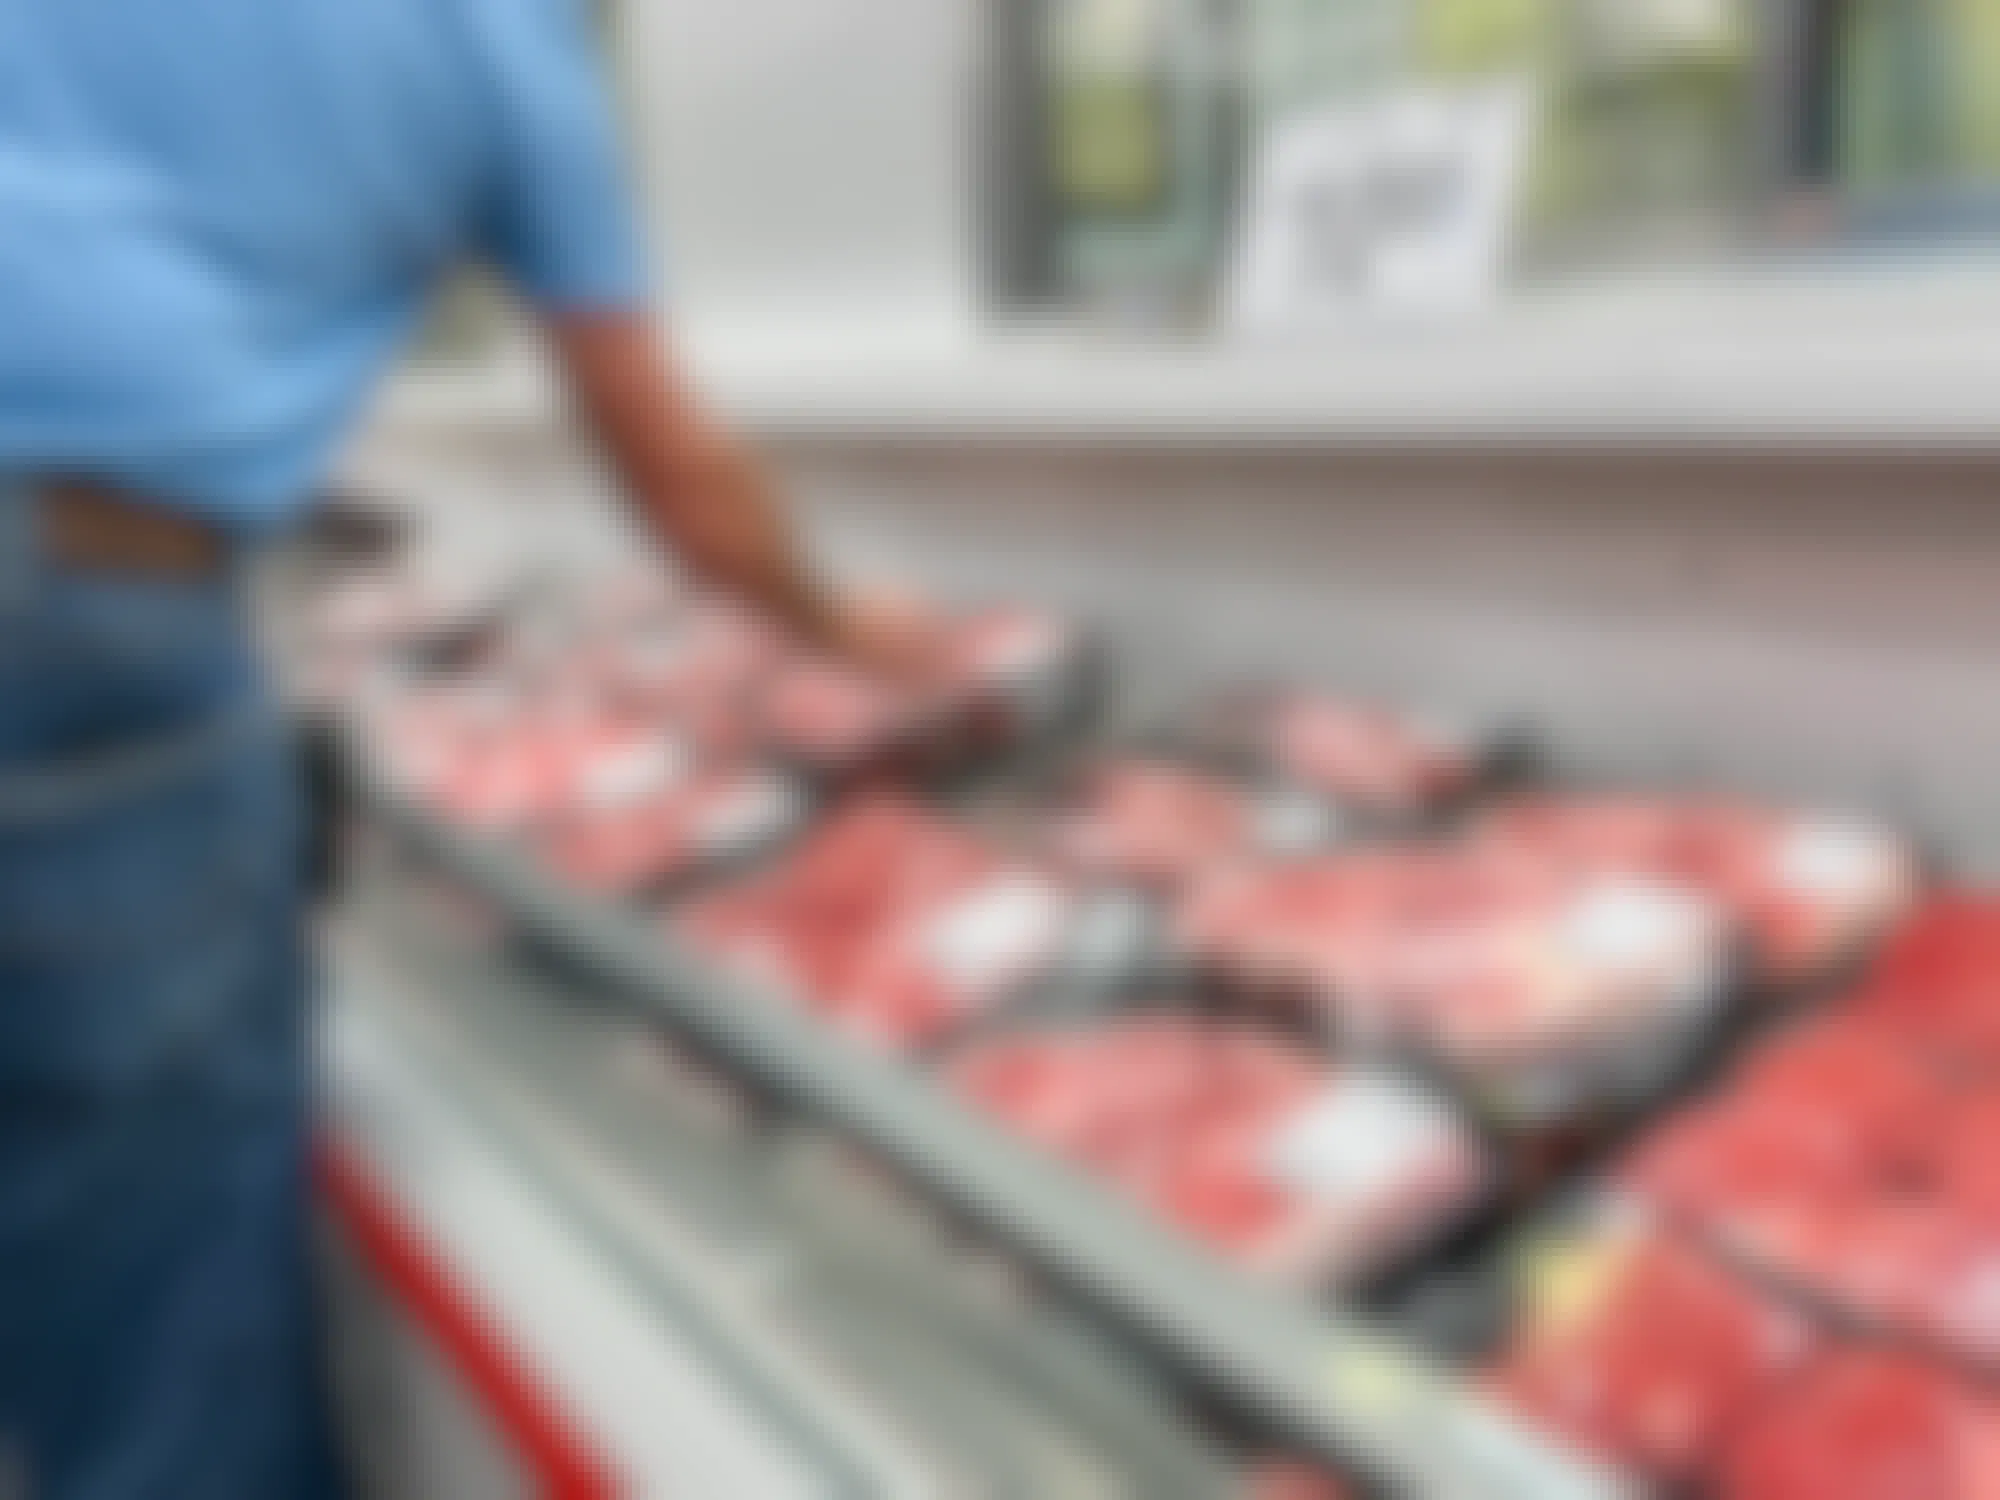 A Sam's Club employee stocking meat into a refrigerated display